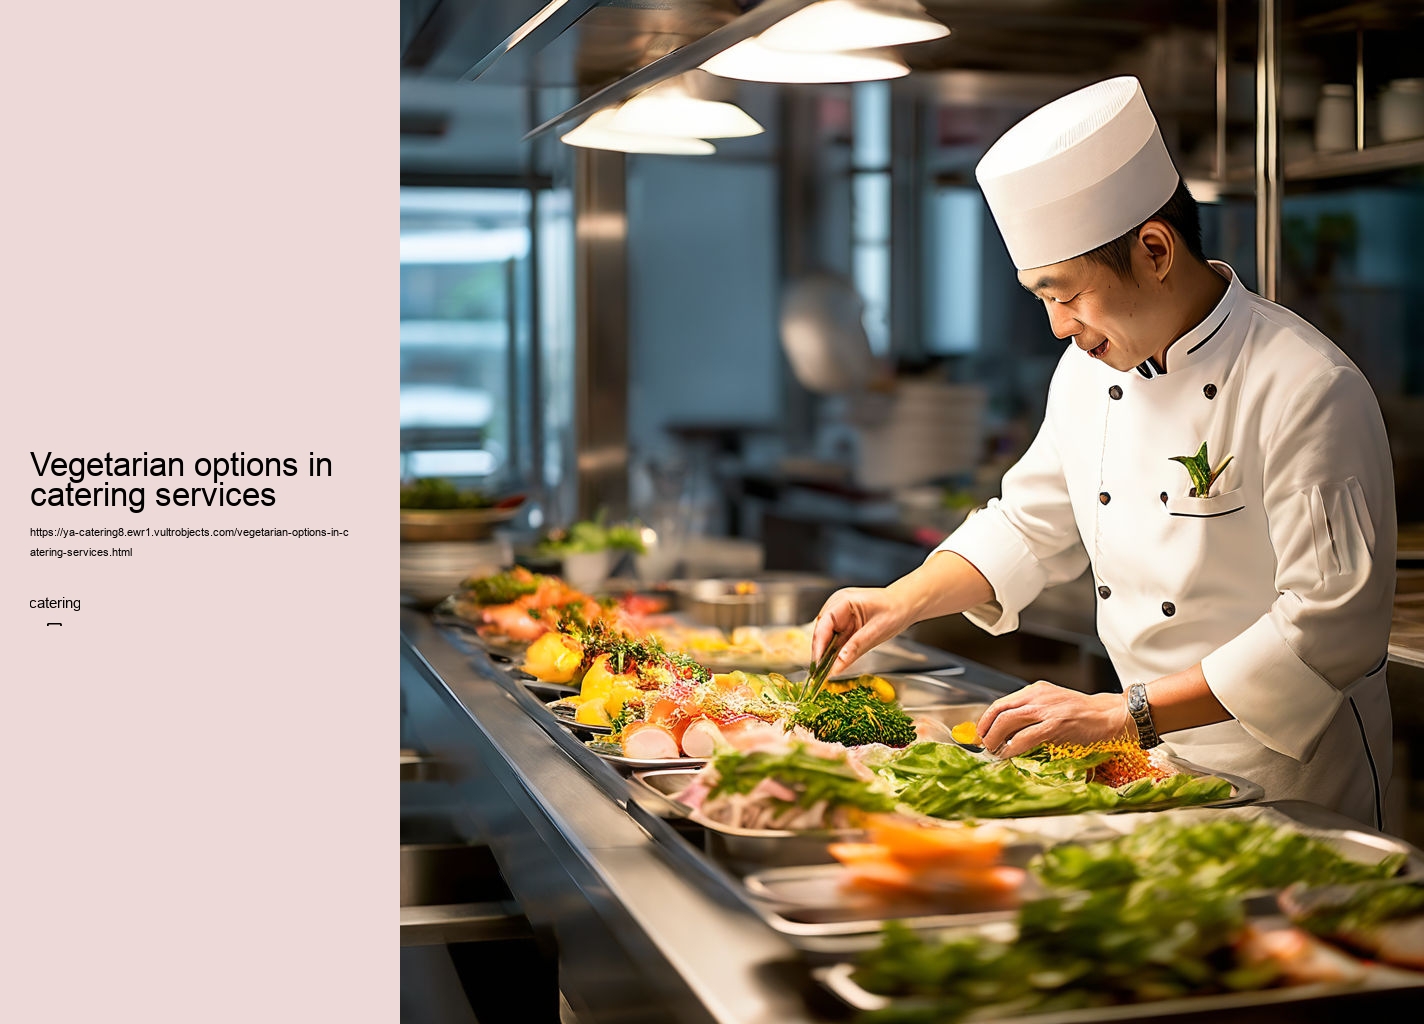 Vegetarian options in catering services